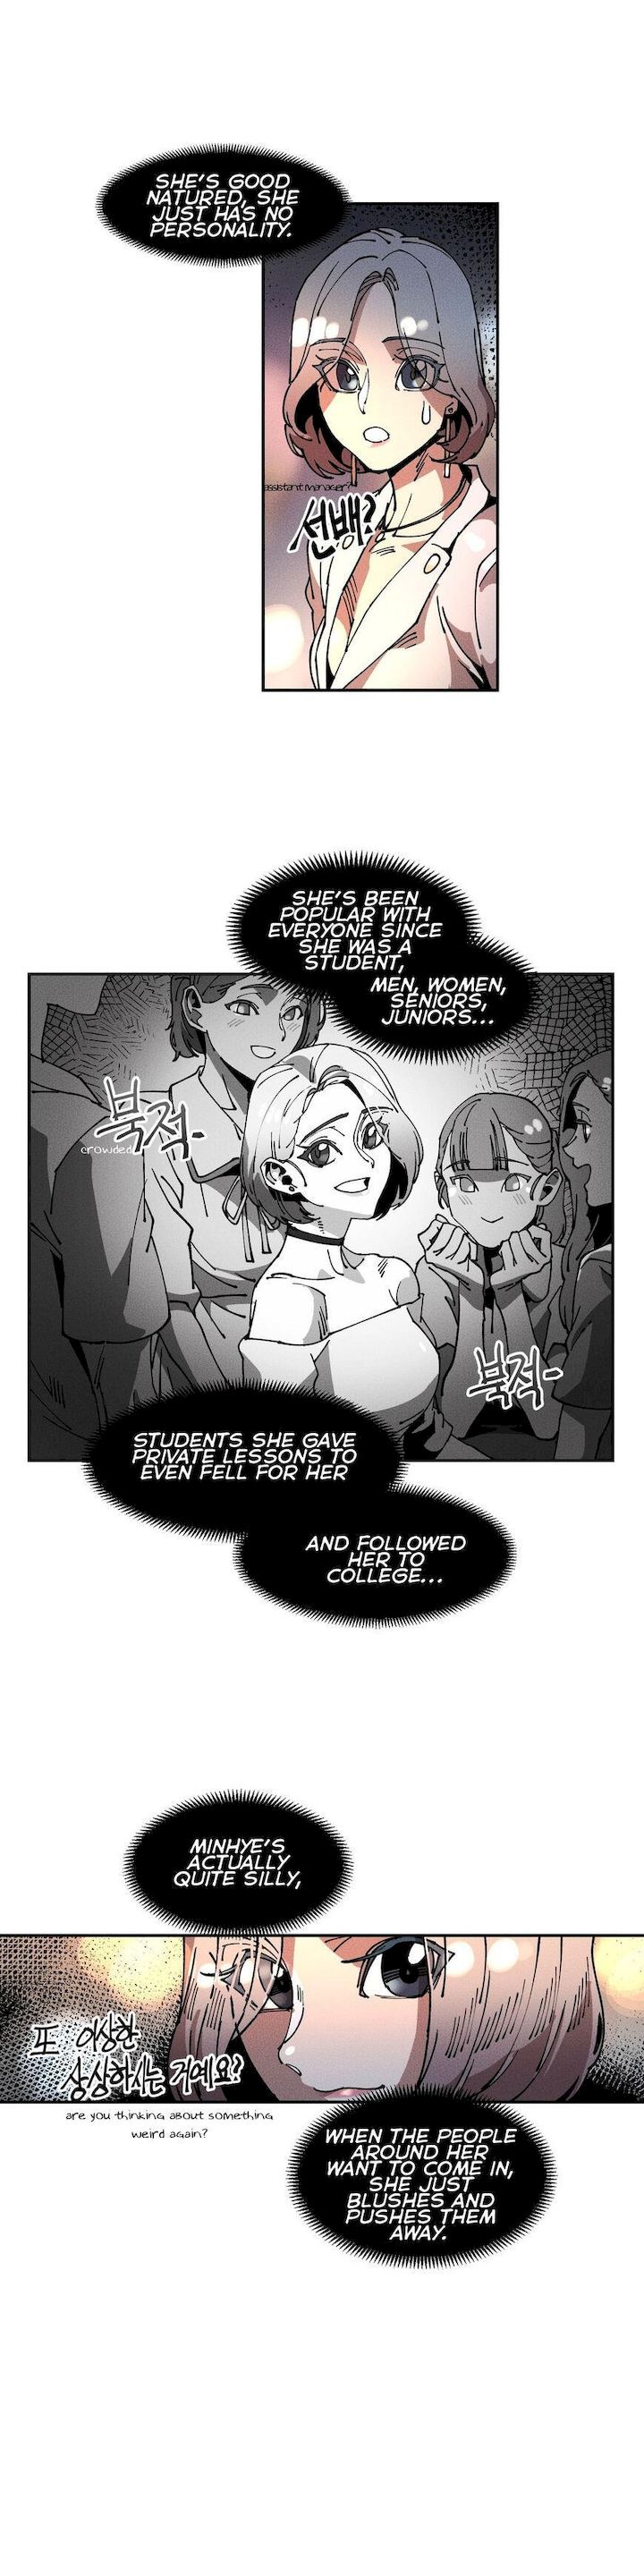 White Angels Get No Rest - Chapter 16 Page 6